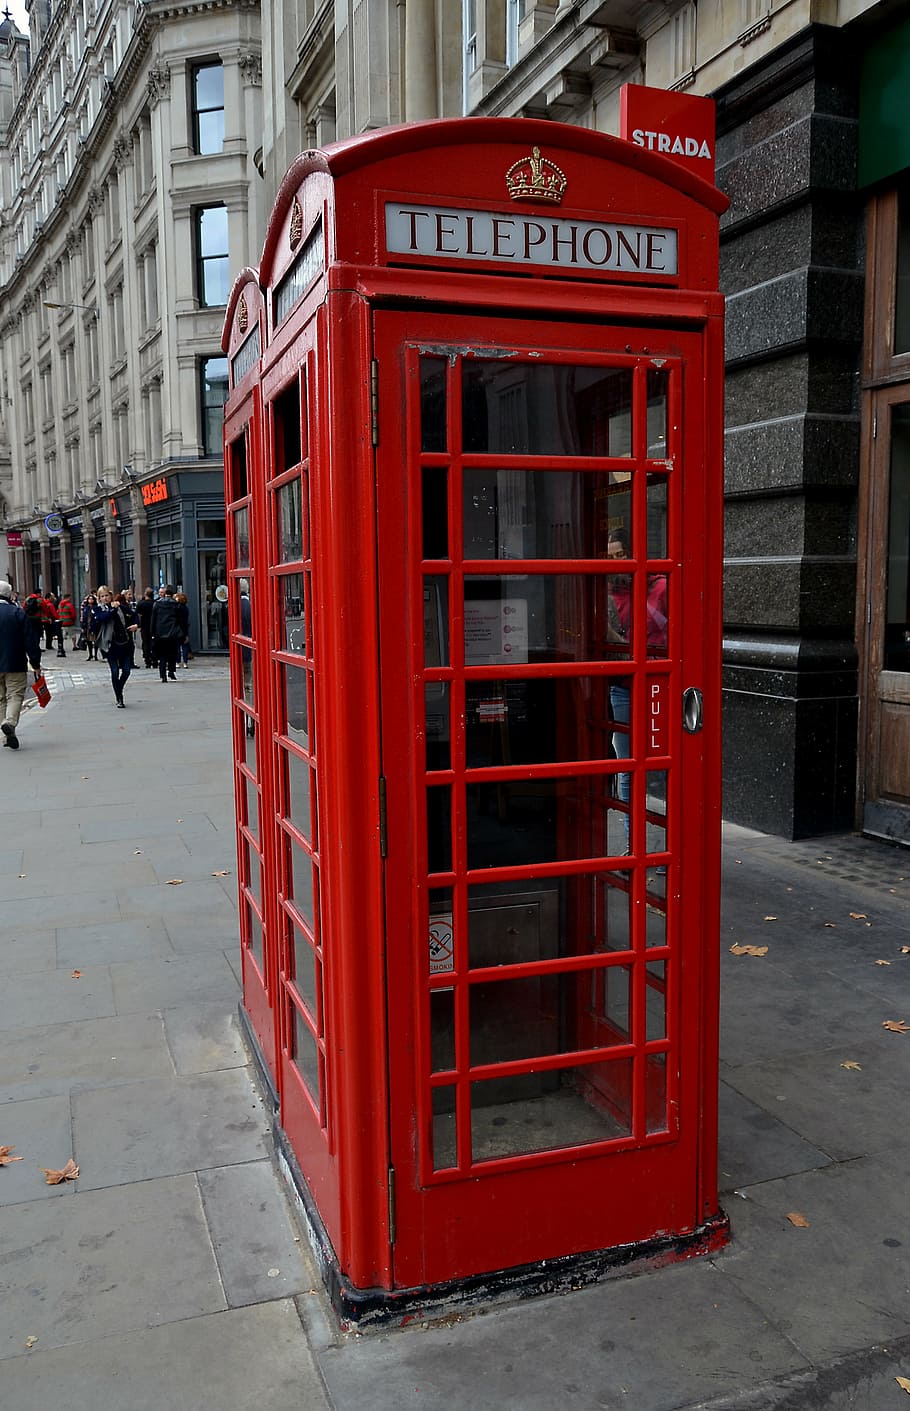 phone booth, red, london, england, telephone booth, architecture, telephone, communication, city, built structure